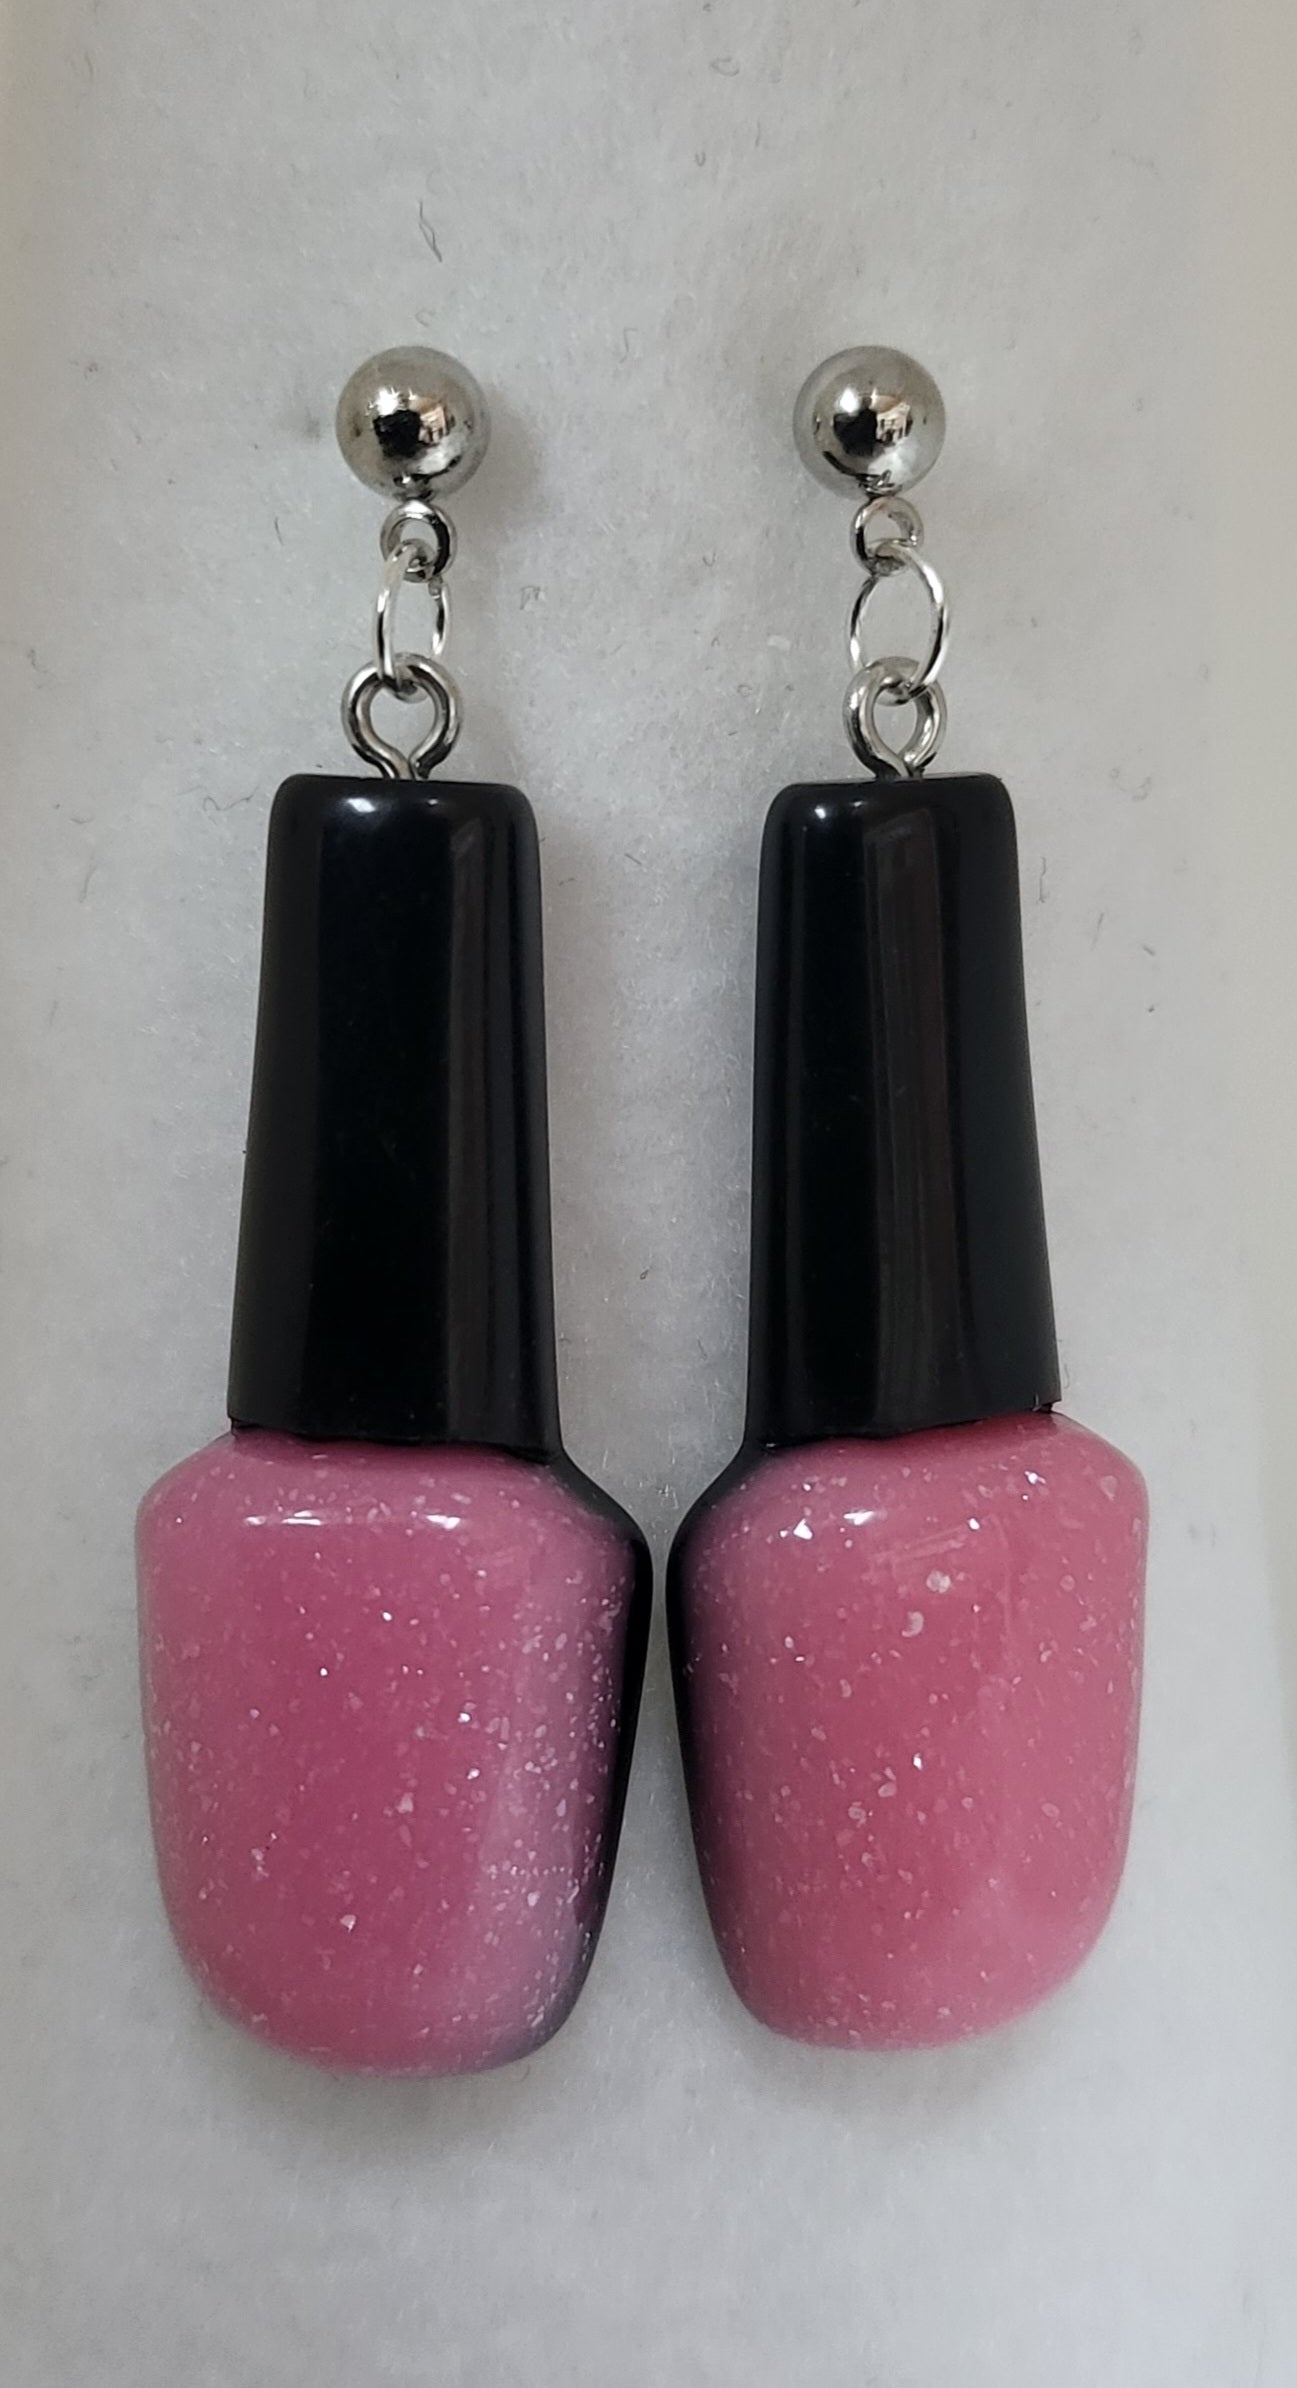 Large Nail Polish Bottle Earrings and Necklace for Nail Techs